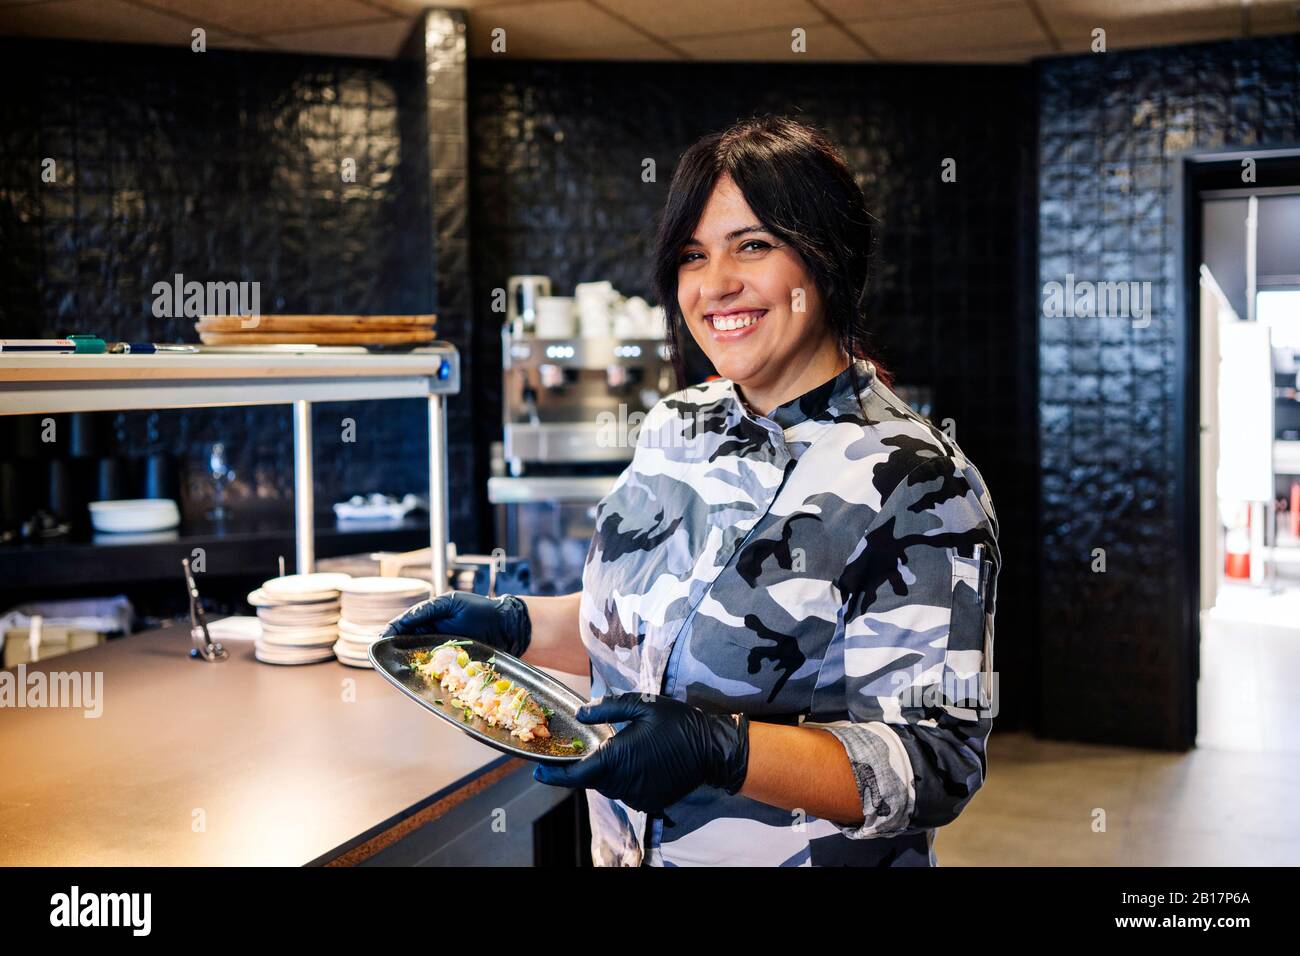 Portrait of smiling chef presenting a dish in restaurant kitchen Stock Photo